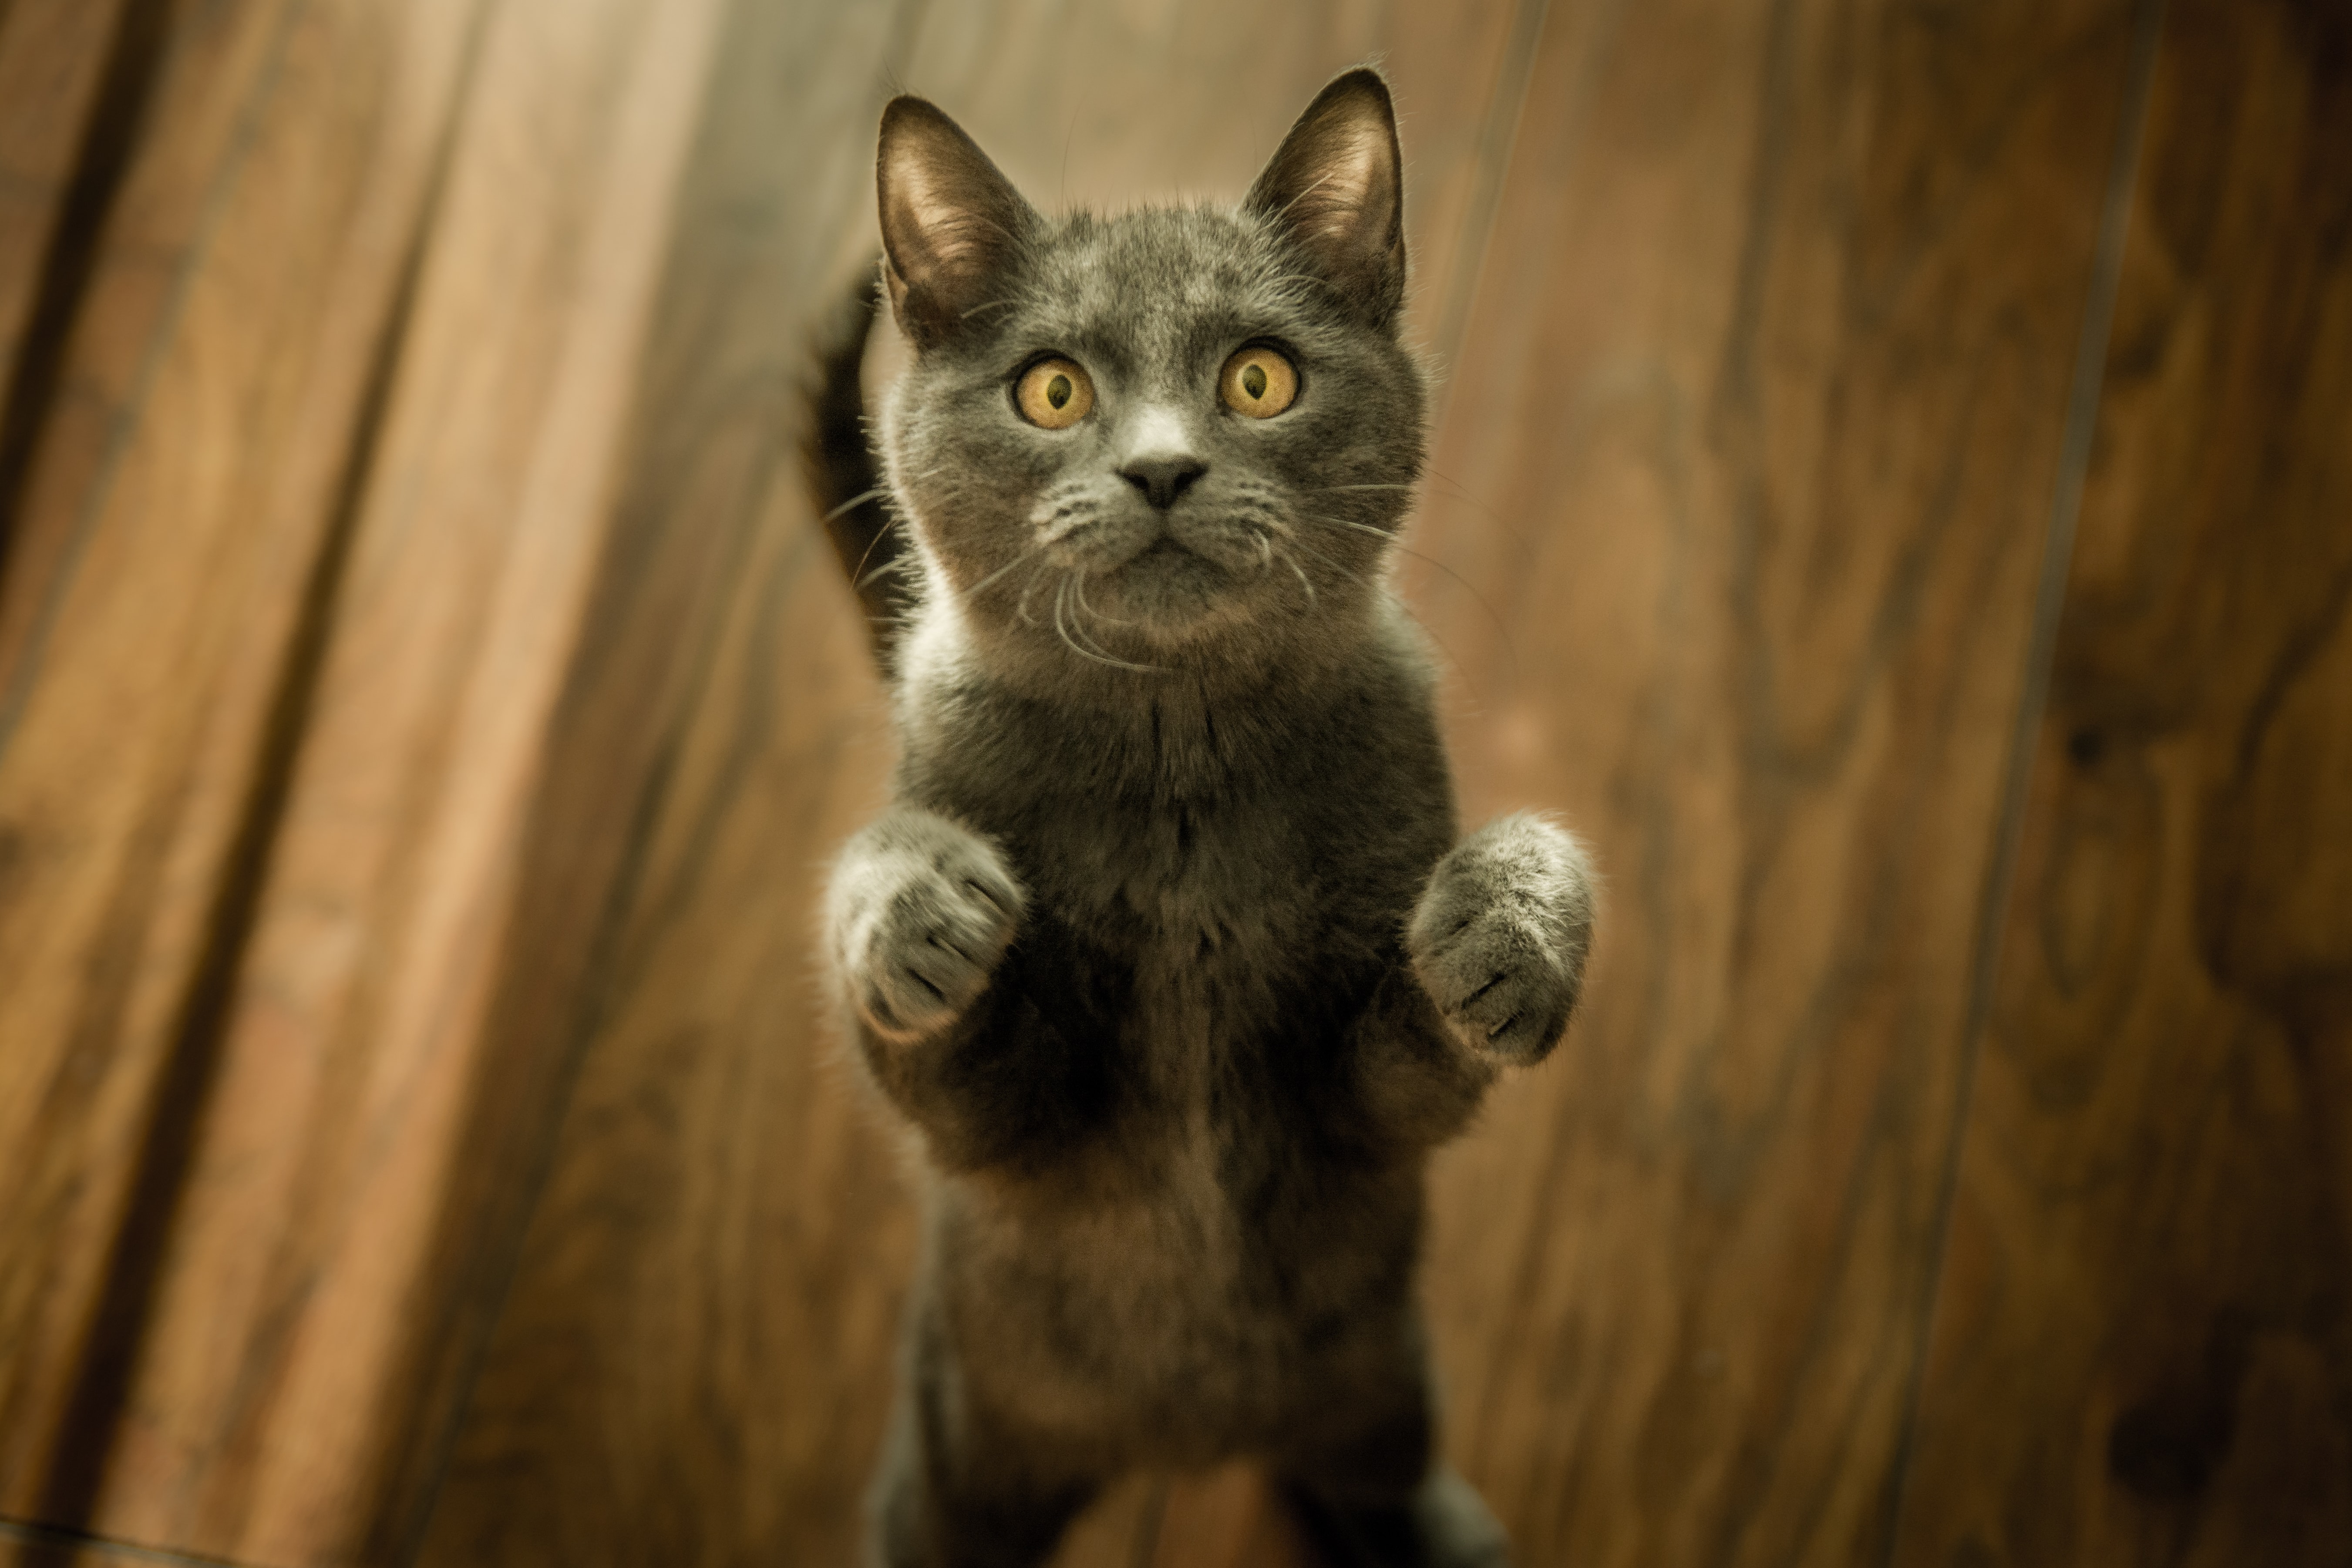 A grey cat standing on two legs looking at the camera